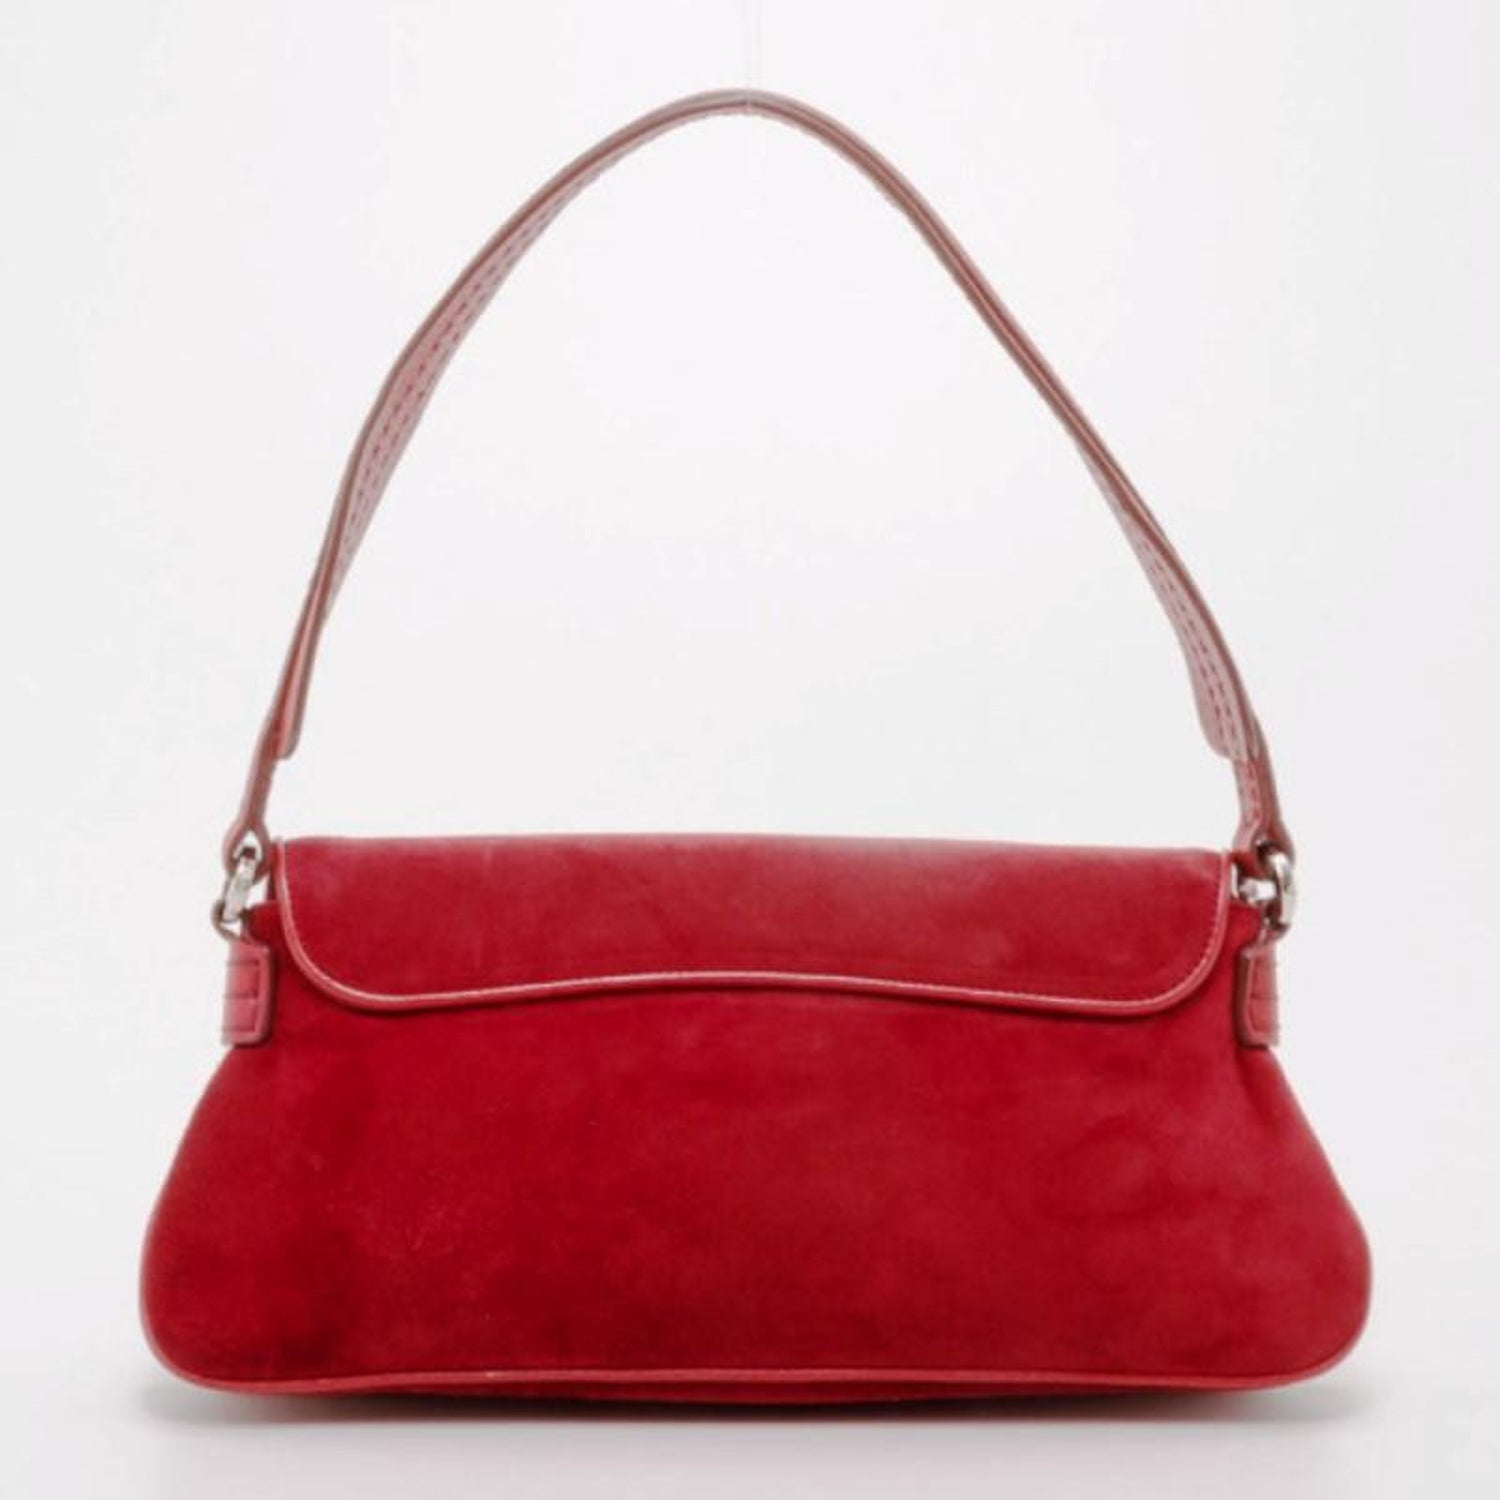 Tods Handbags Shopstyle